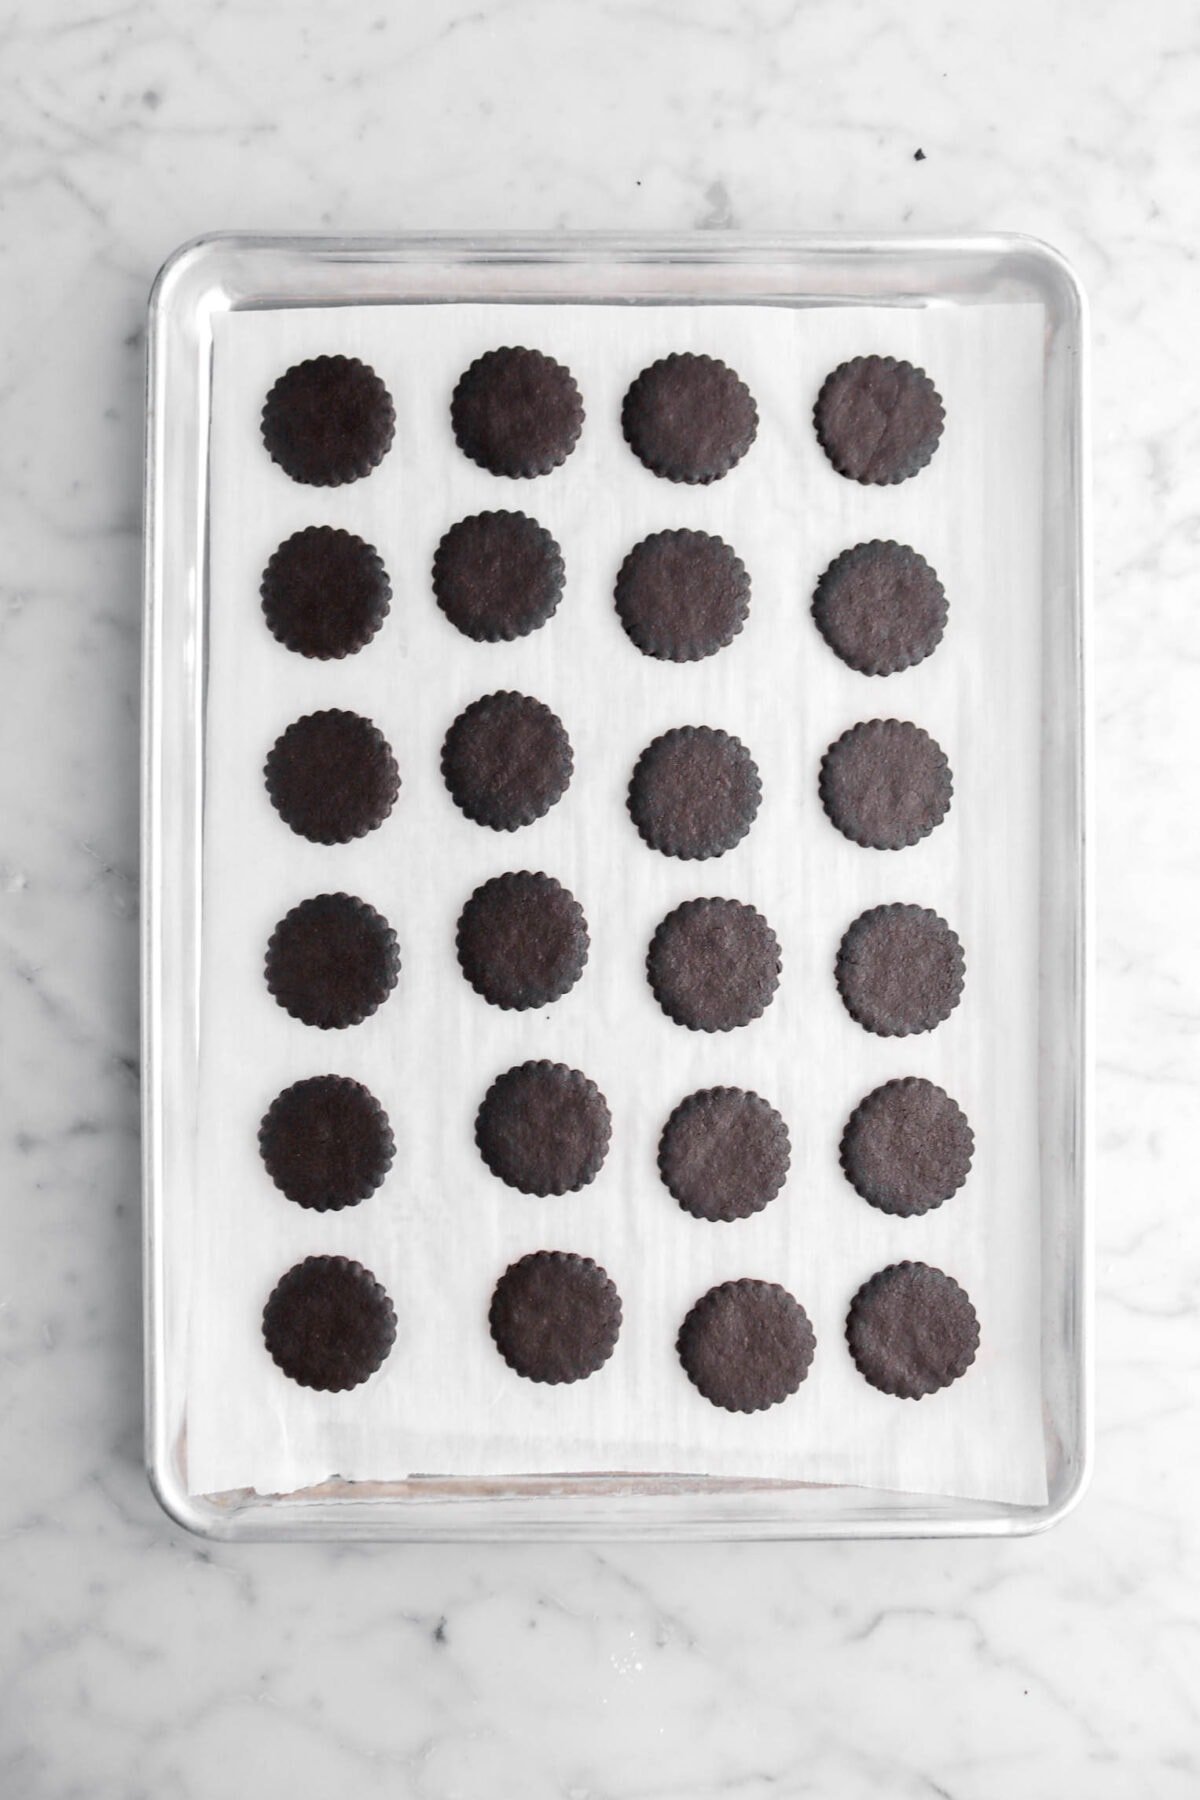 twenty four baked chocolate cookies on lined sheet pan.